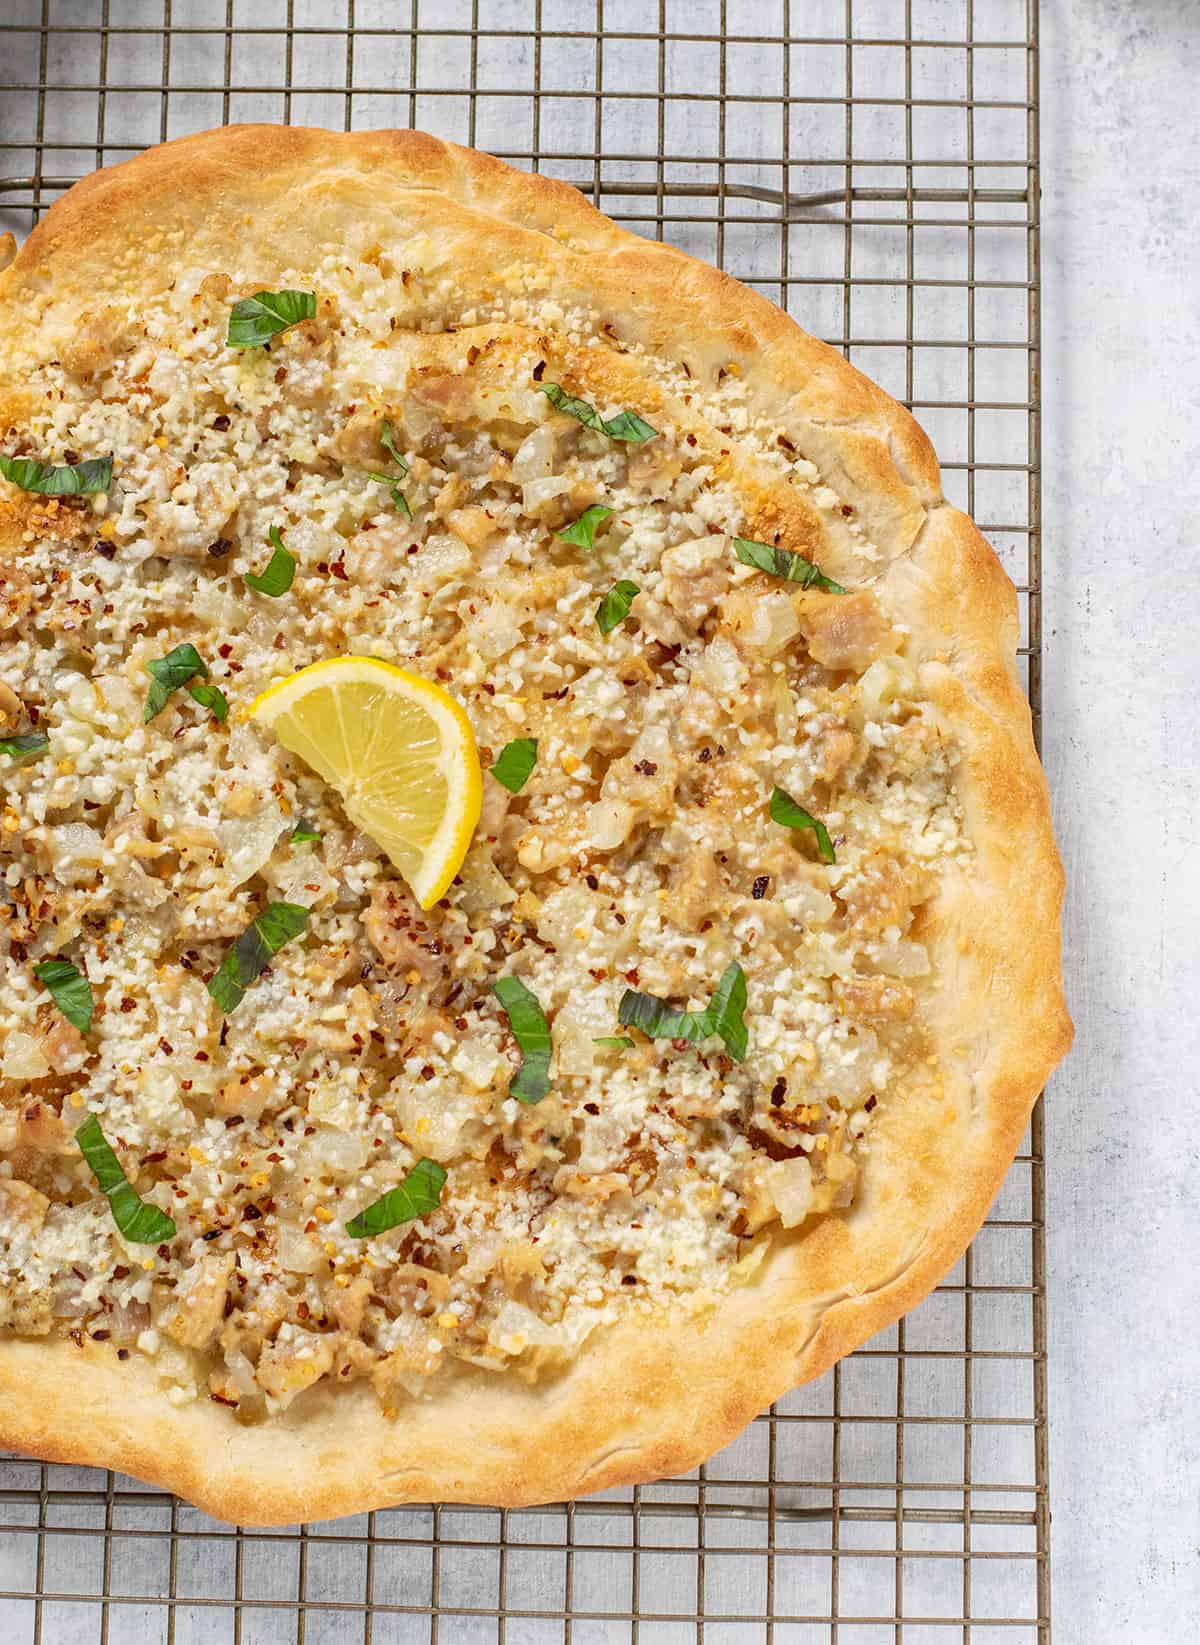 white clam pizza on a cooling rack garnished with lemon and basil